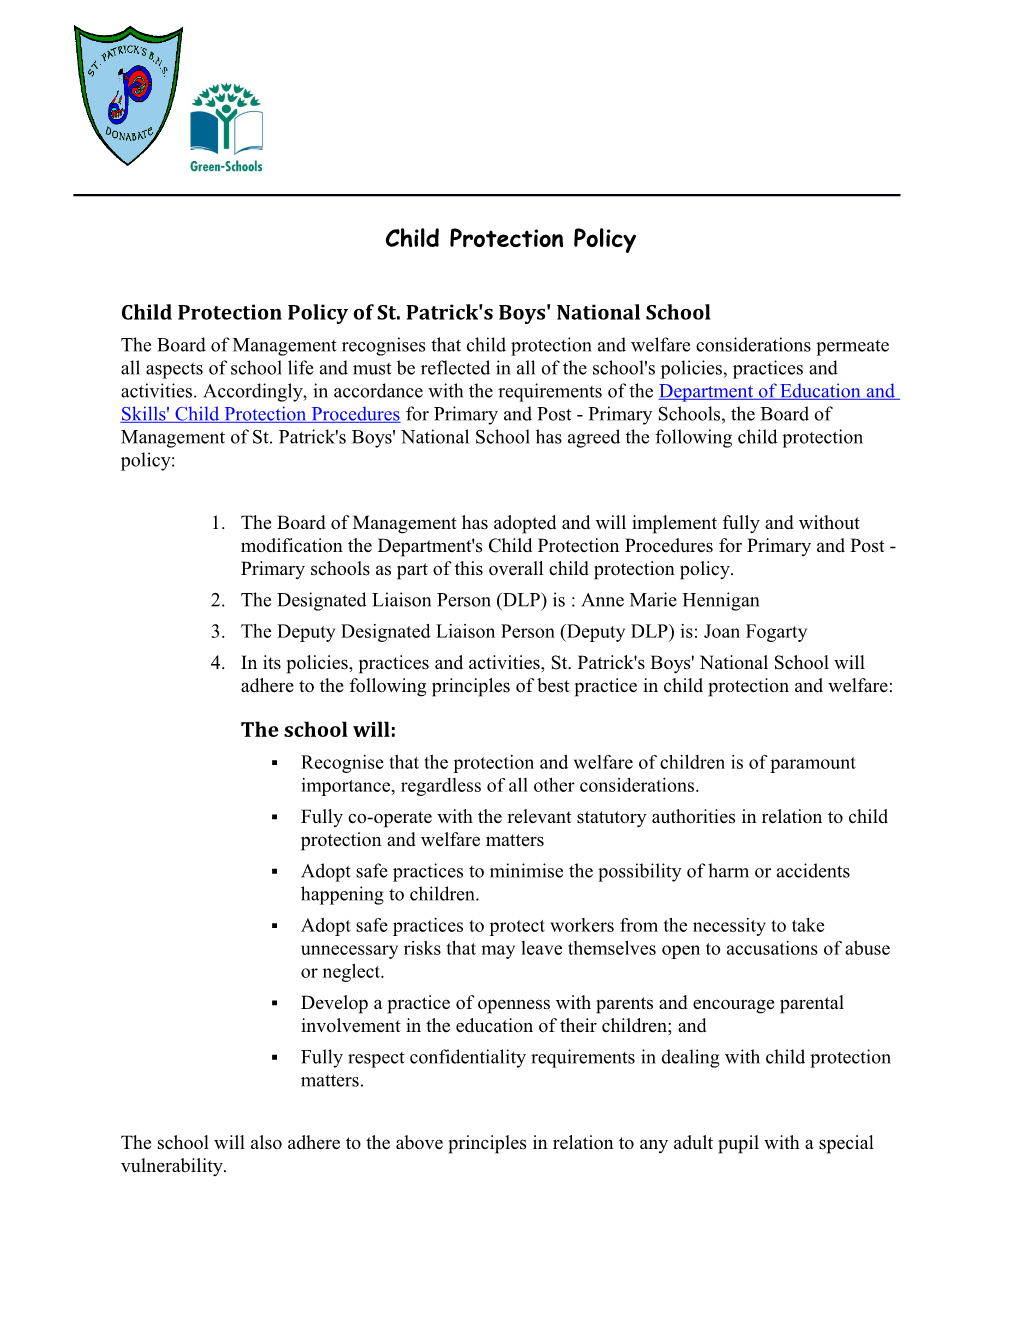 Child Protection Policy of St. Patrick's Boys' National School